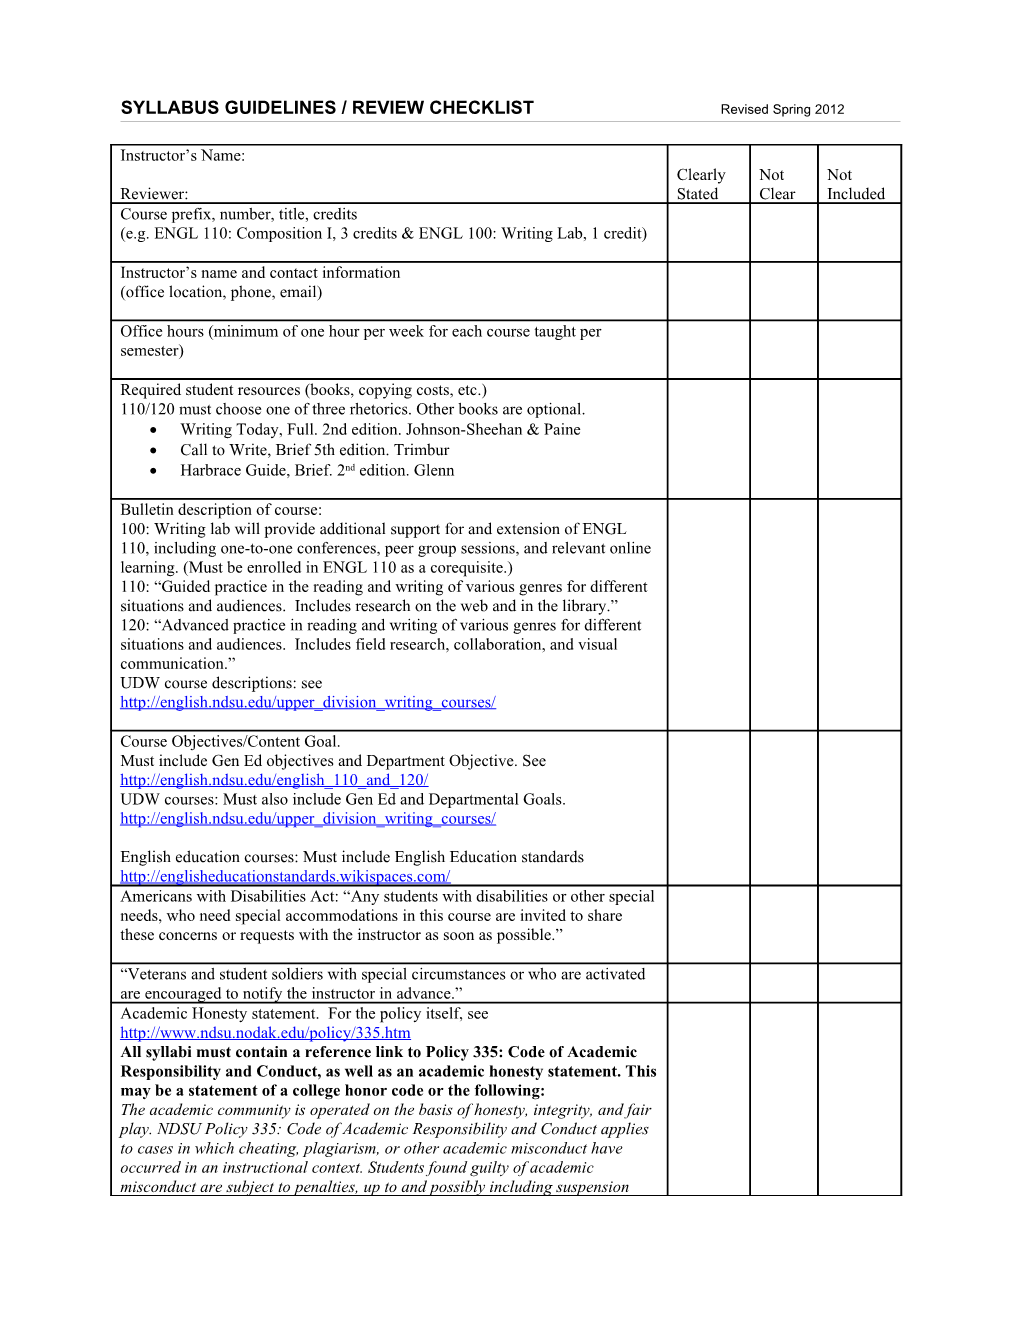 SYLLABUS GUIDELINES / REVIEW Checklistrevised Spring 2012